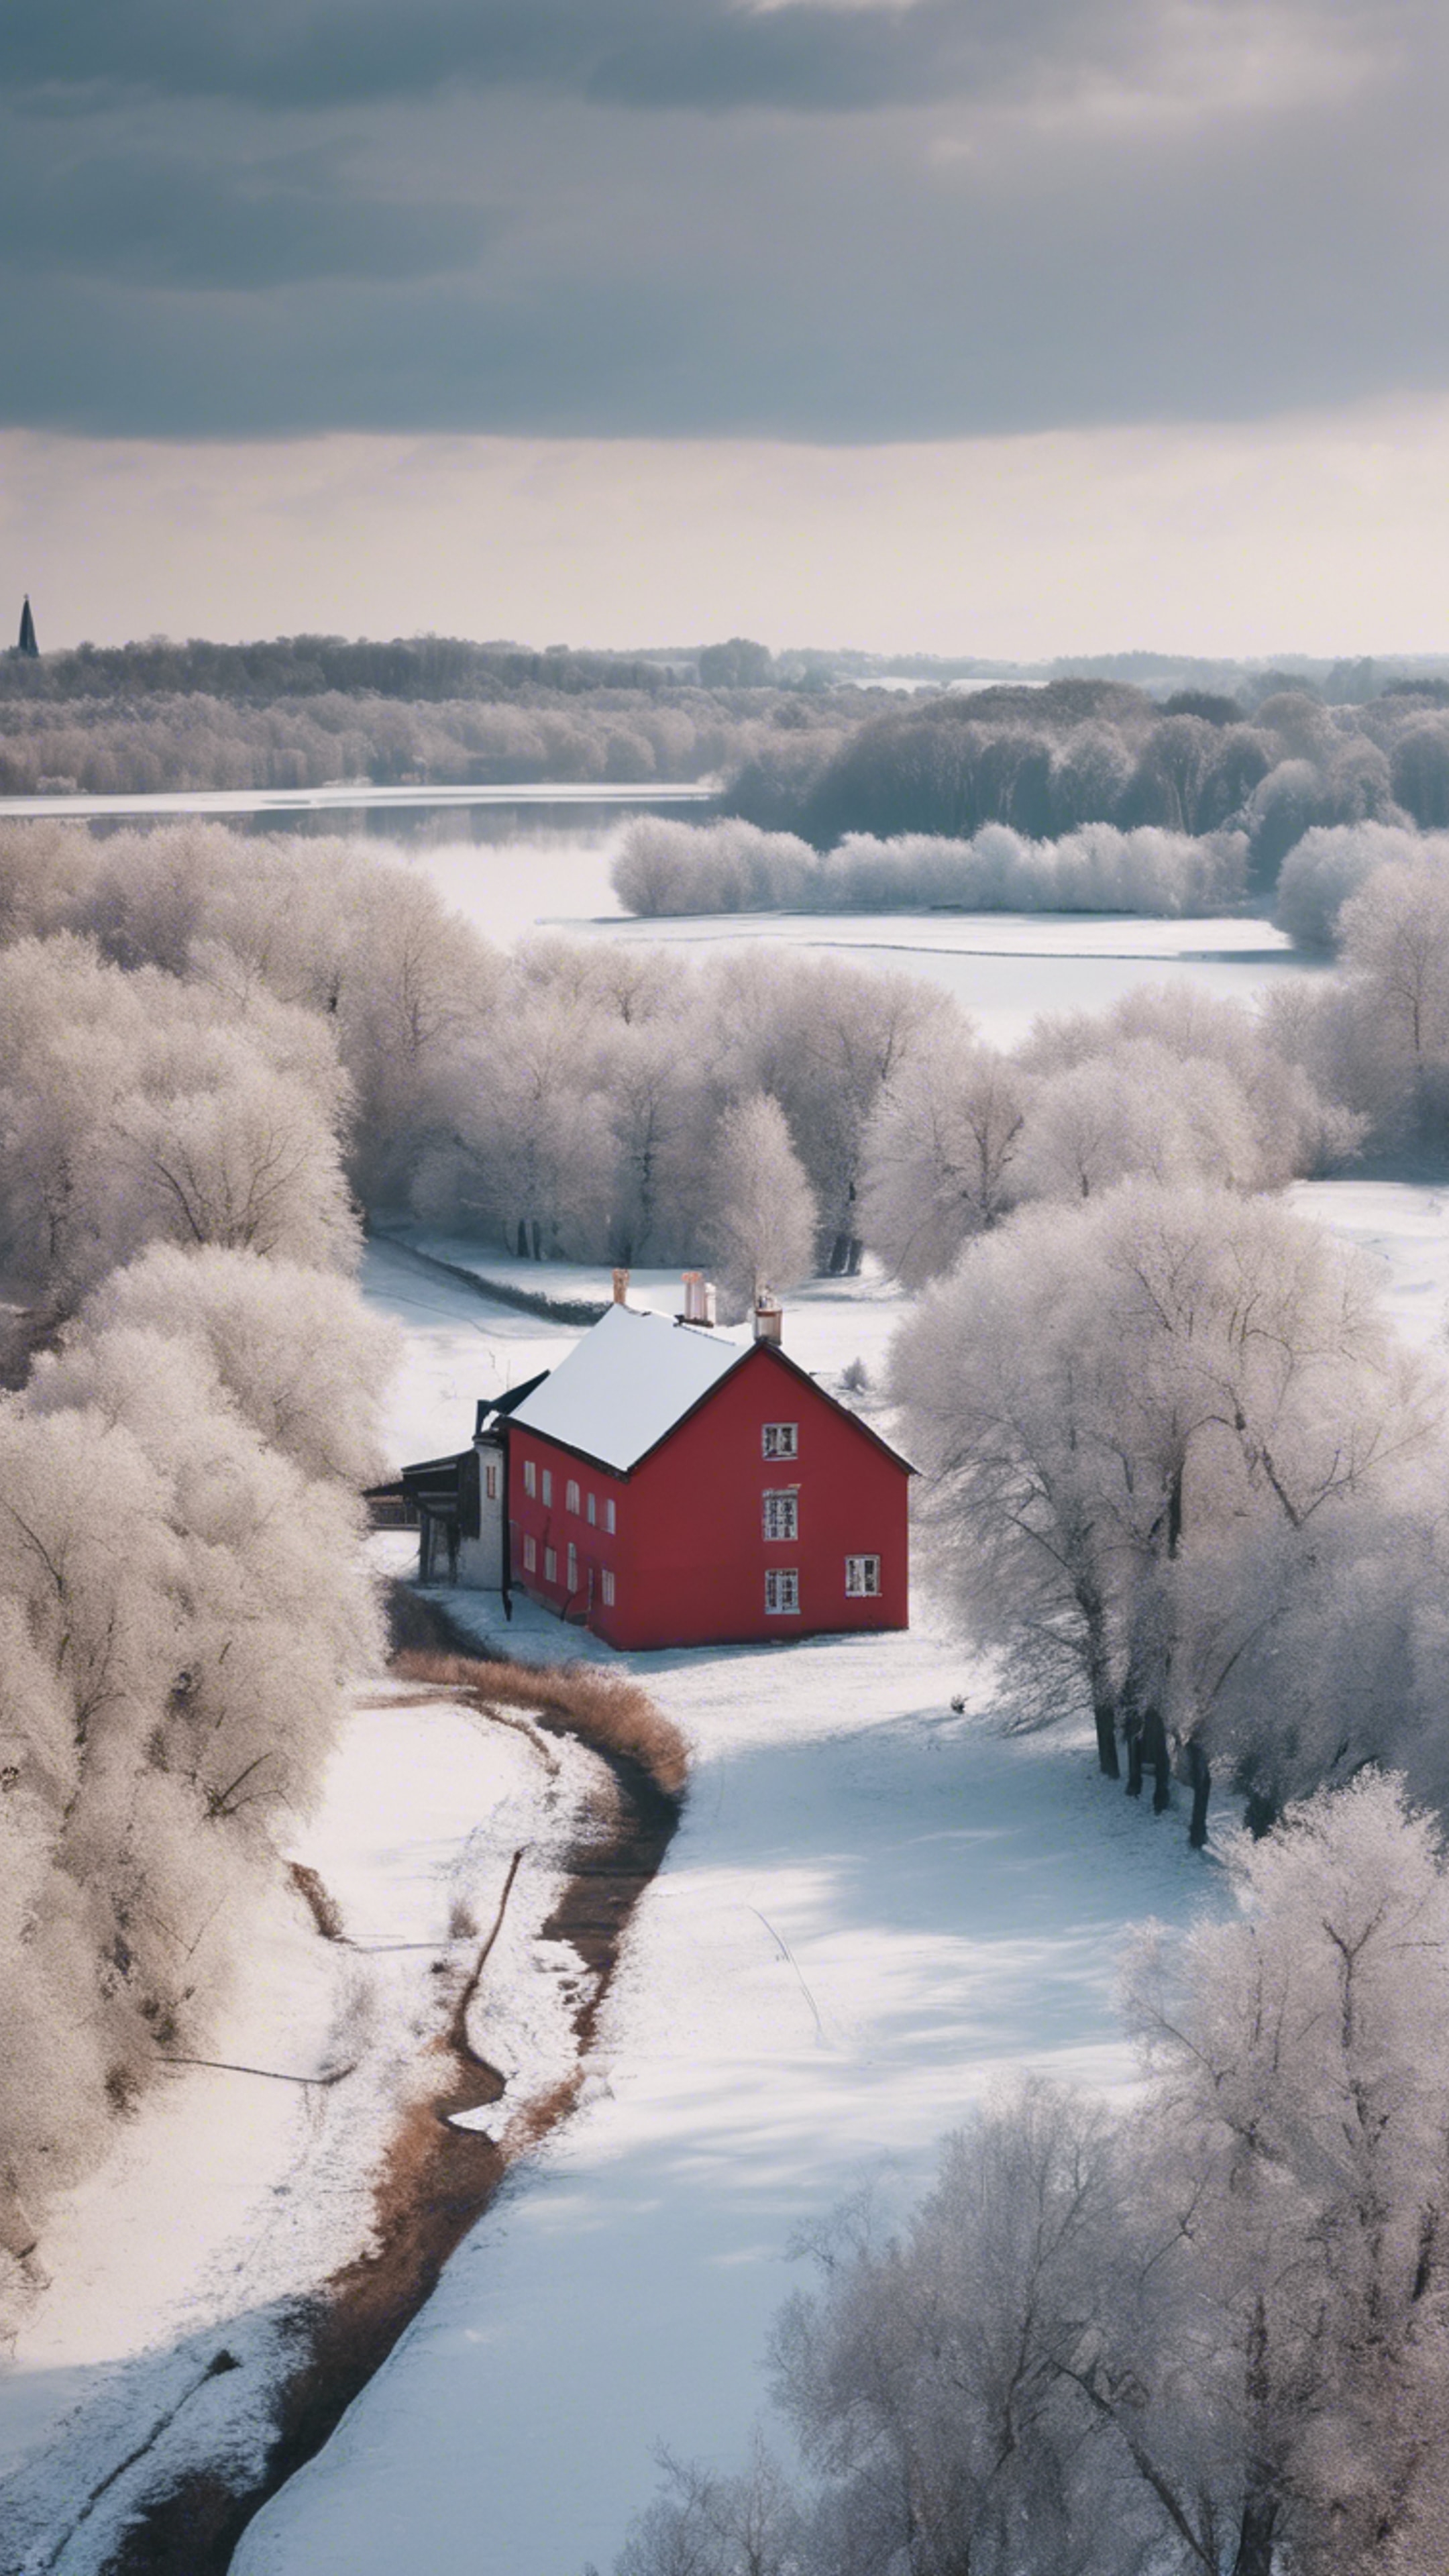 A snow-covered French country landscape with bare trees, a frozen river, and a small red-roofed house in the distance. Fondo de pantalla[86a496d4055745a5962e]